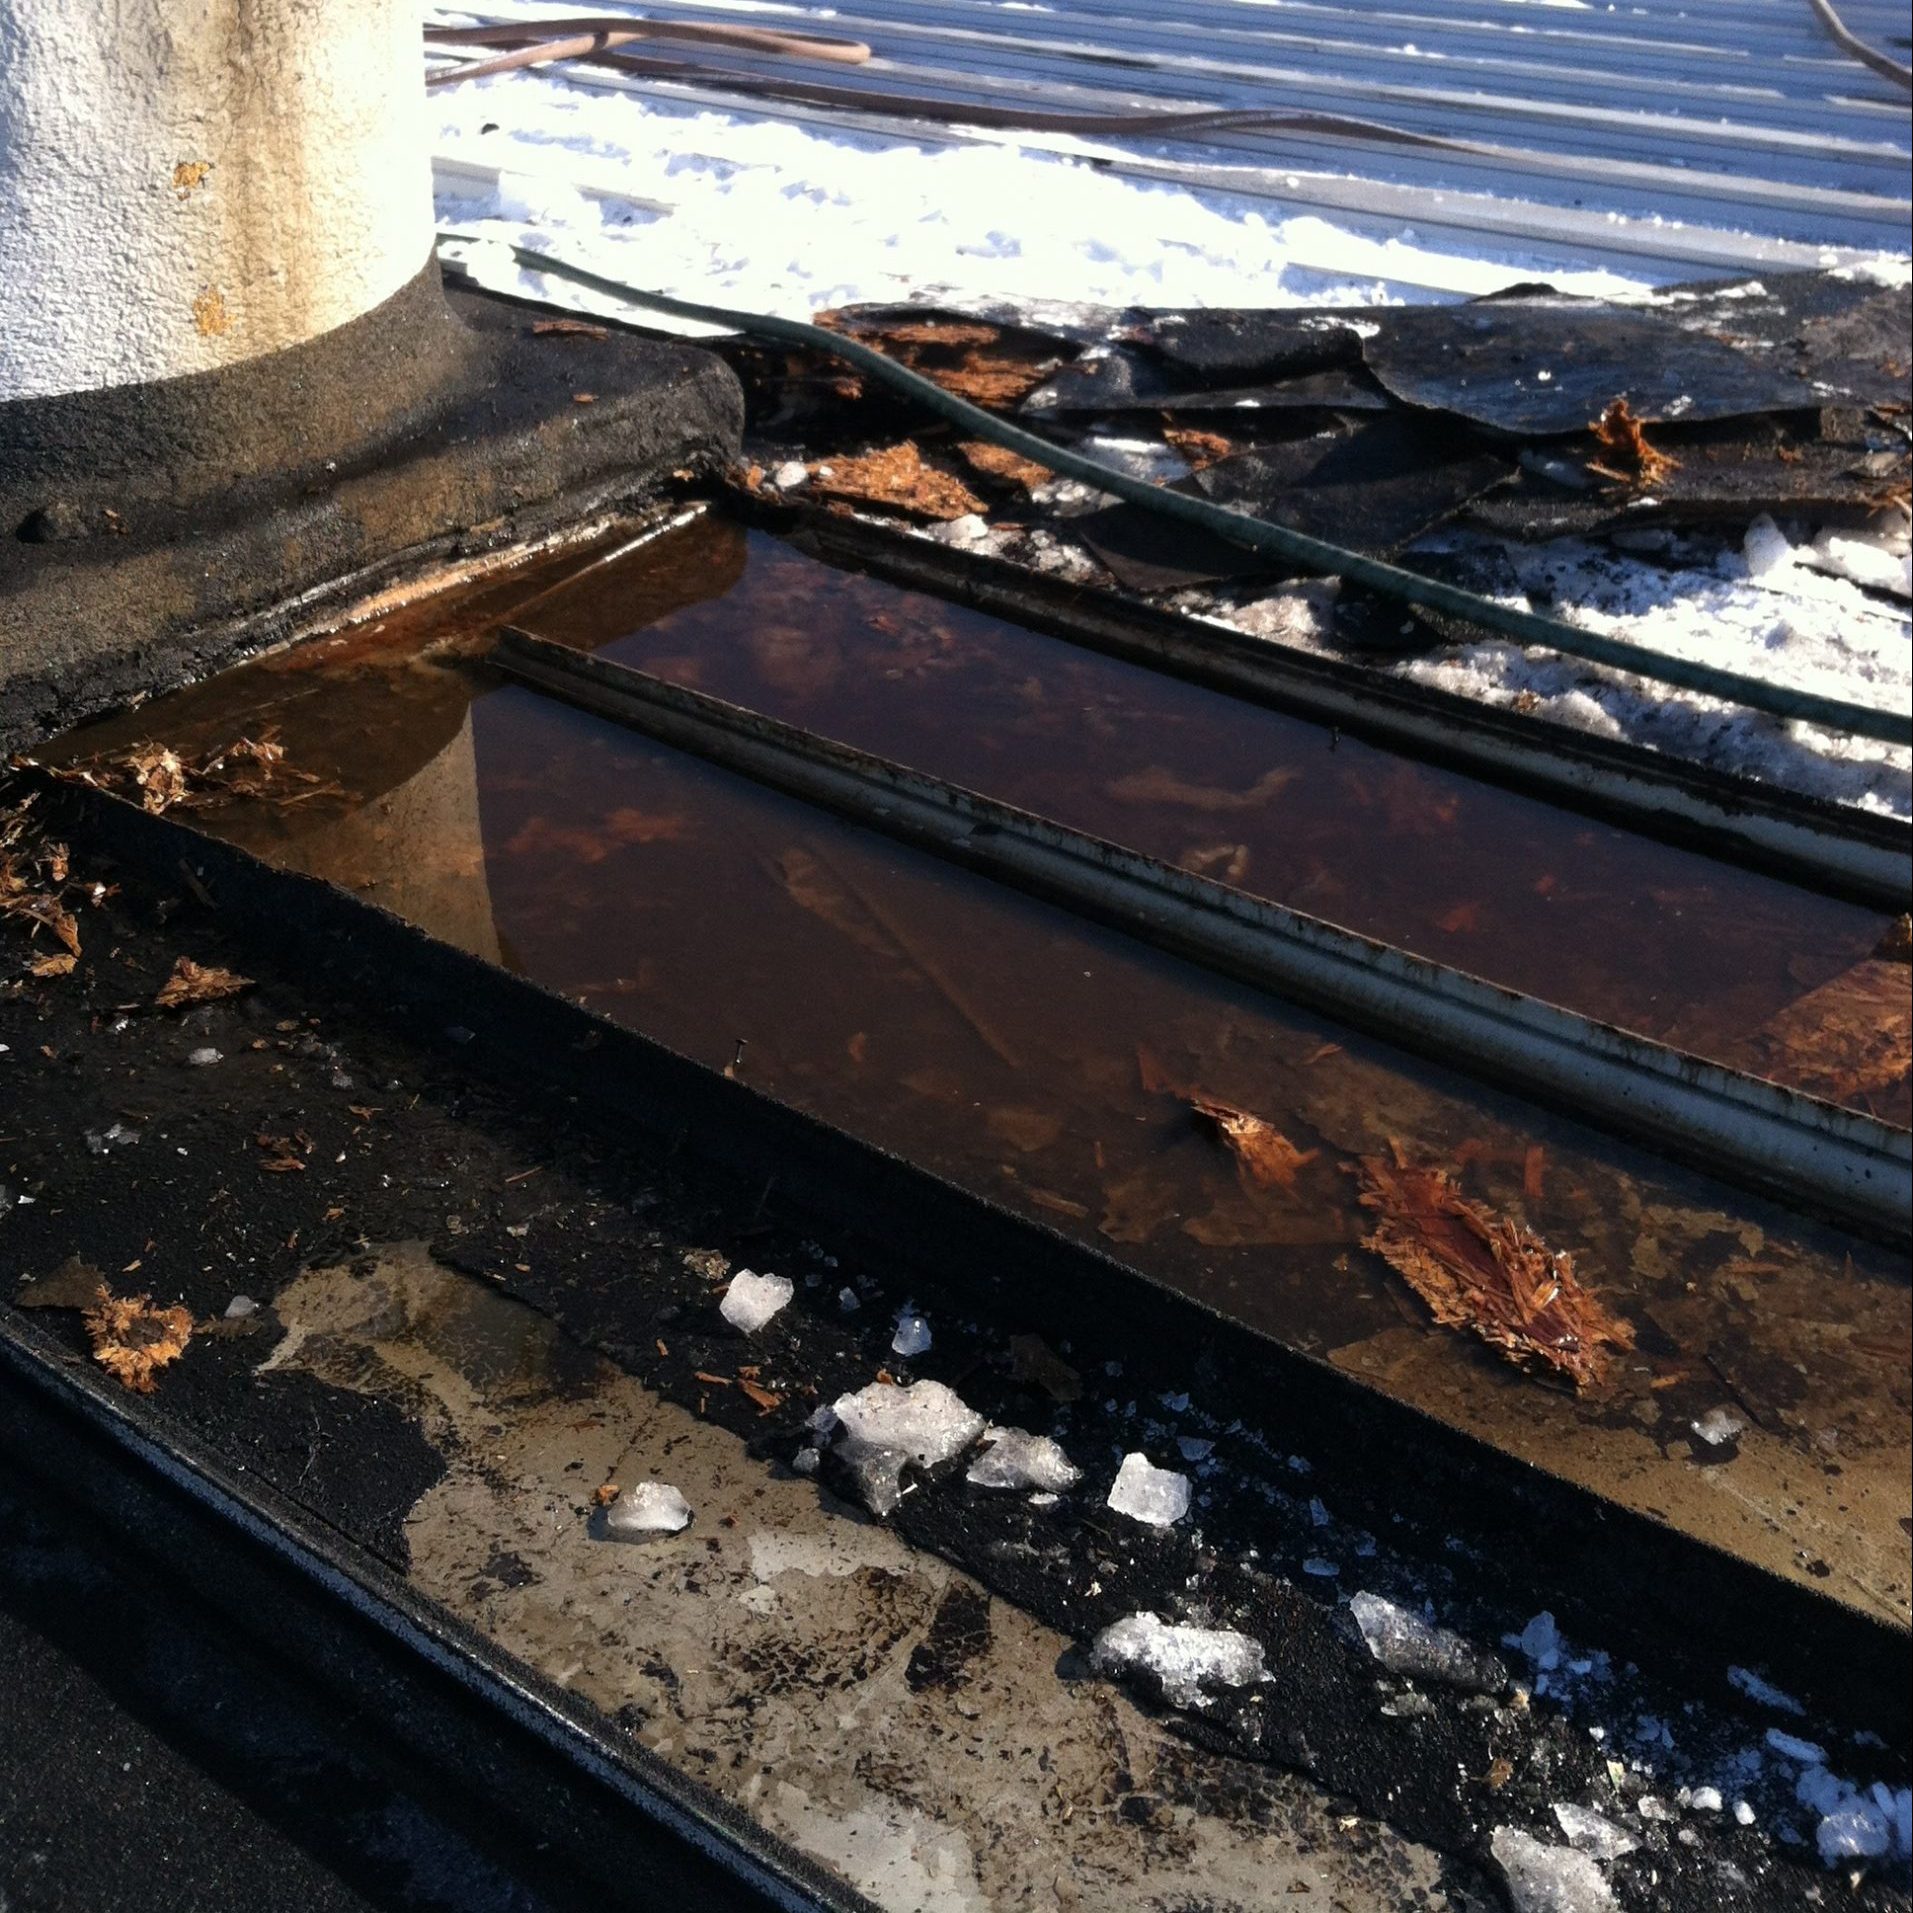 Multiple freezing and thawing cycles melts ice and causes ponding water on vulnerable areas of metal roofs.  